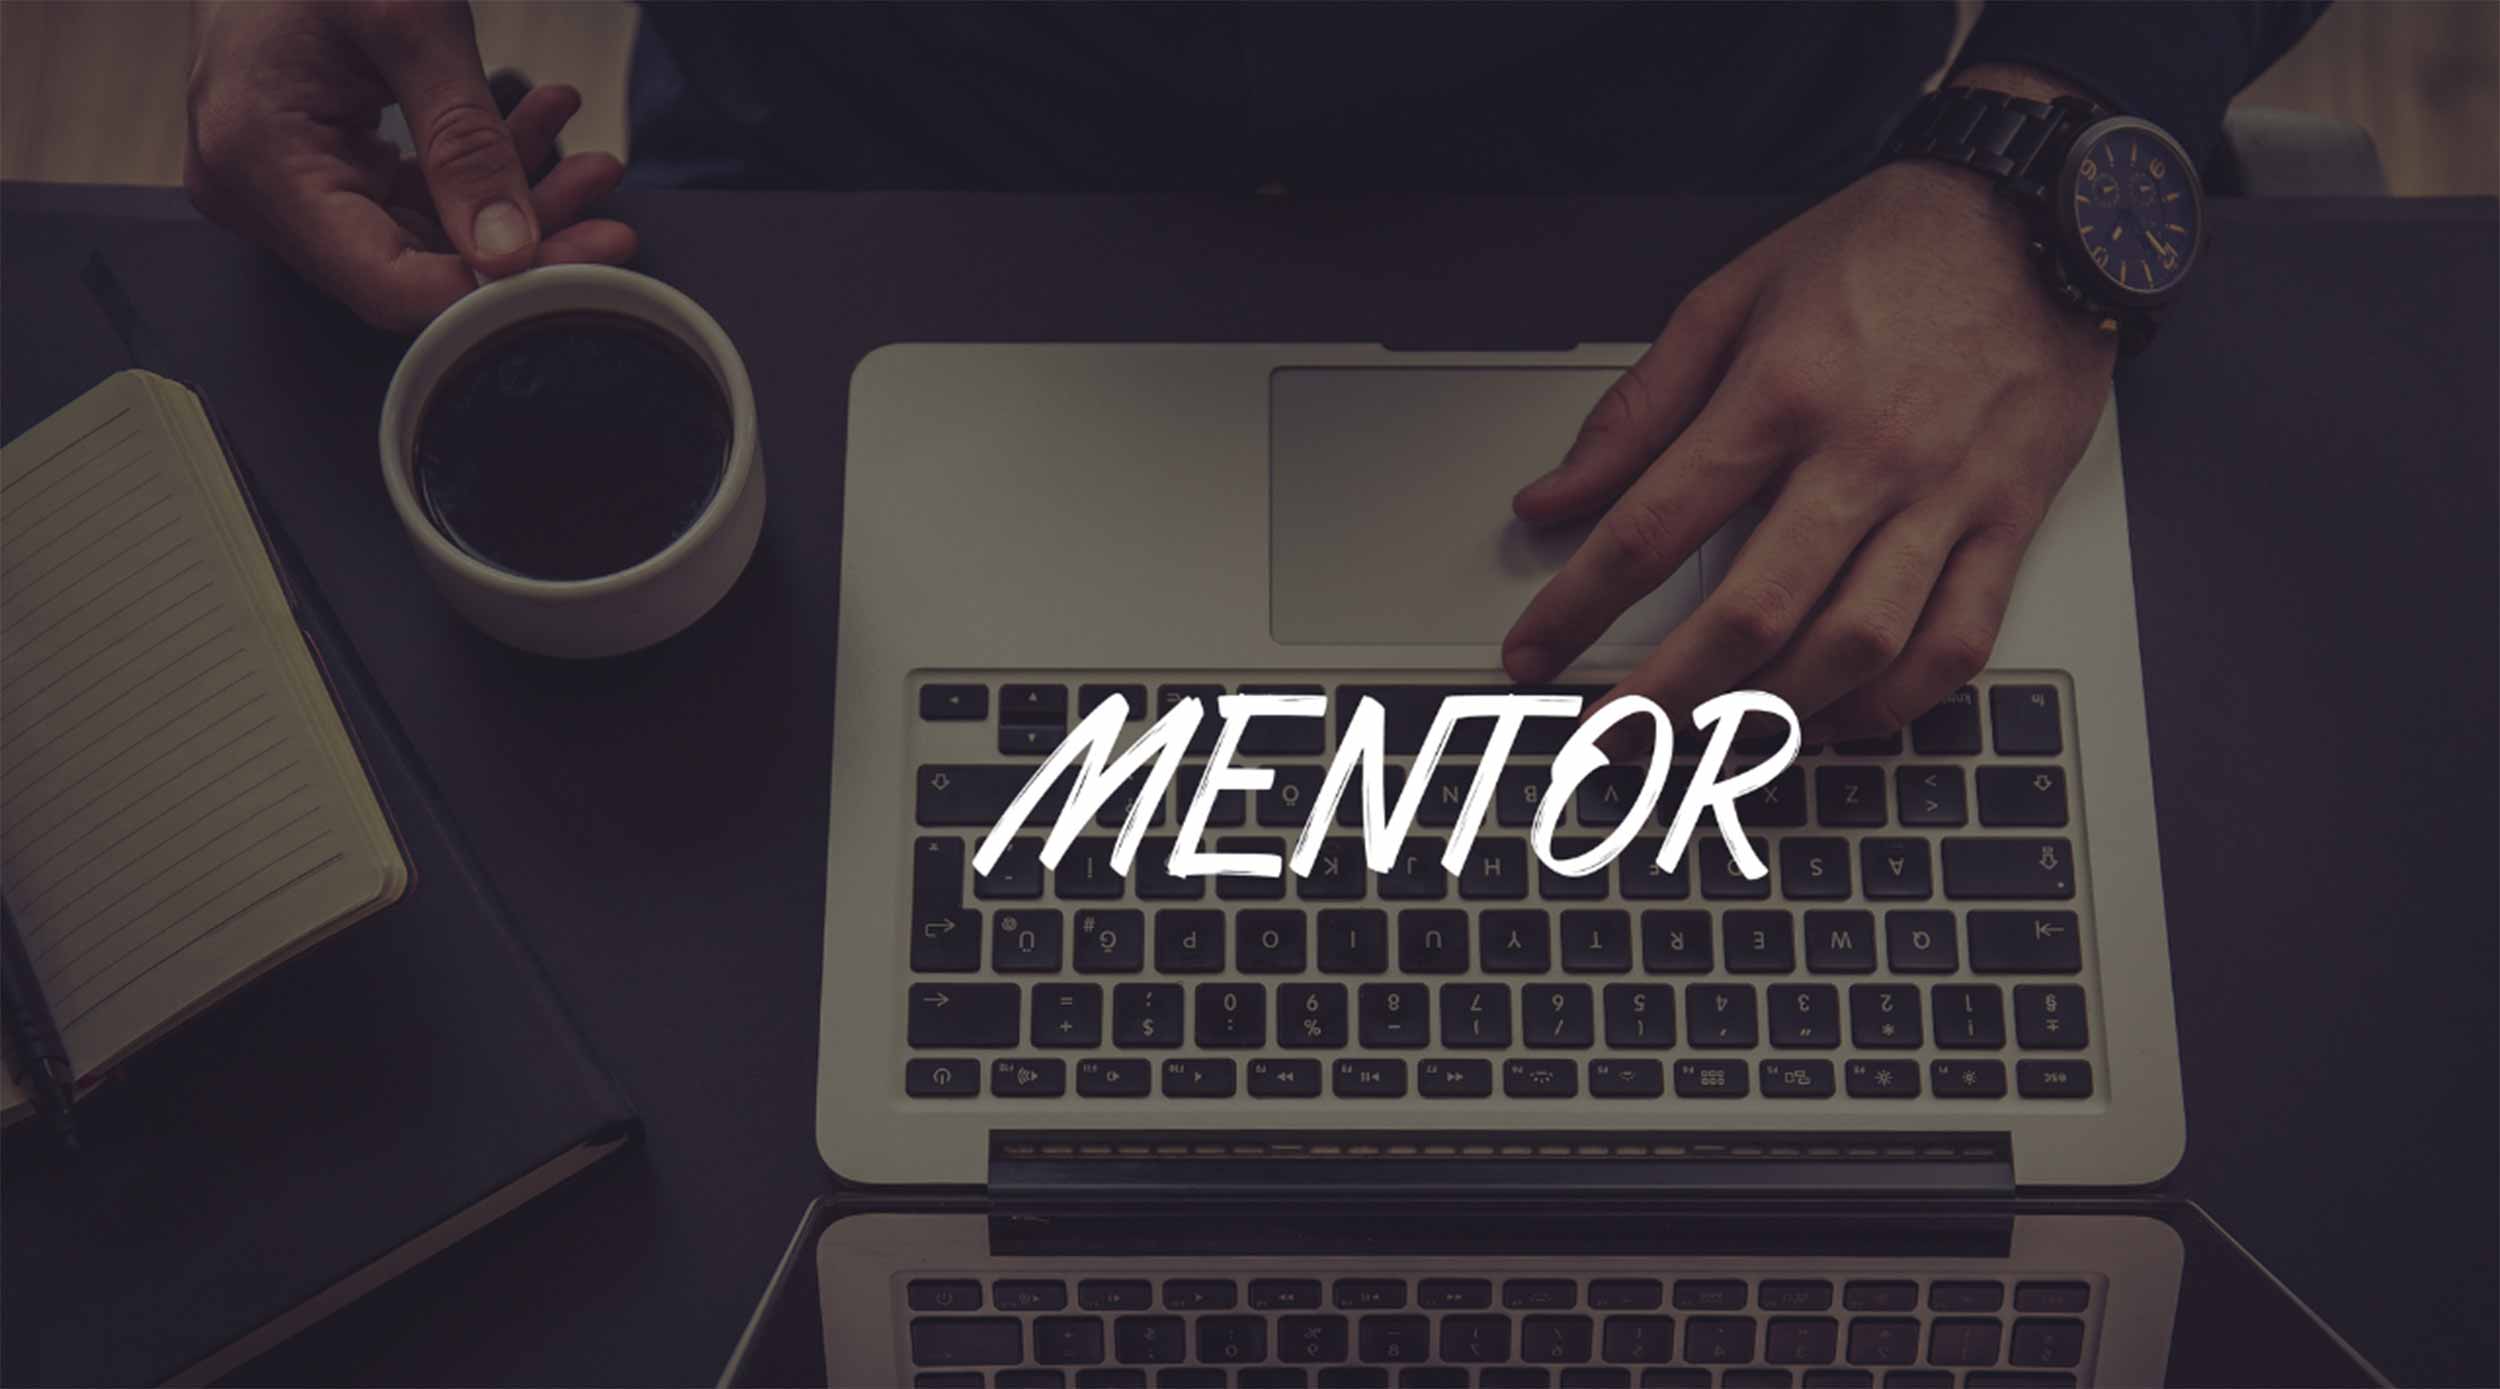 Find the right mentor for your business with our tips